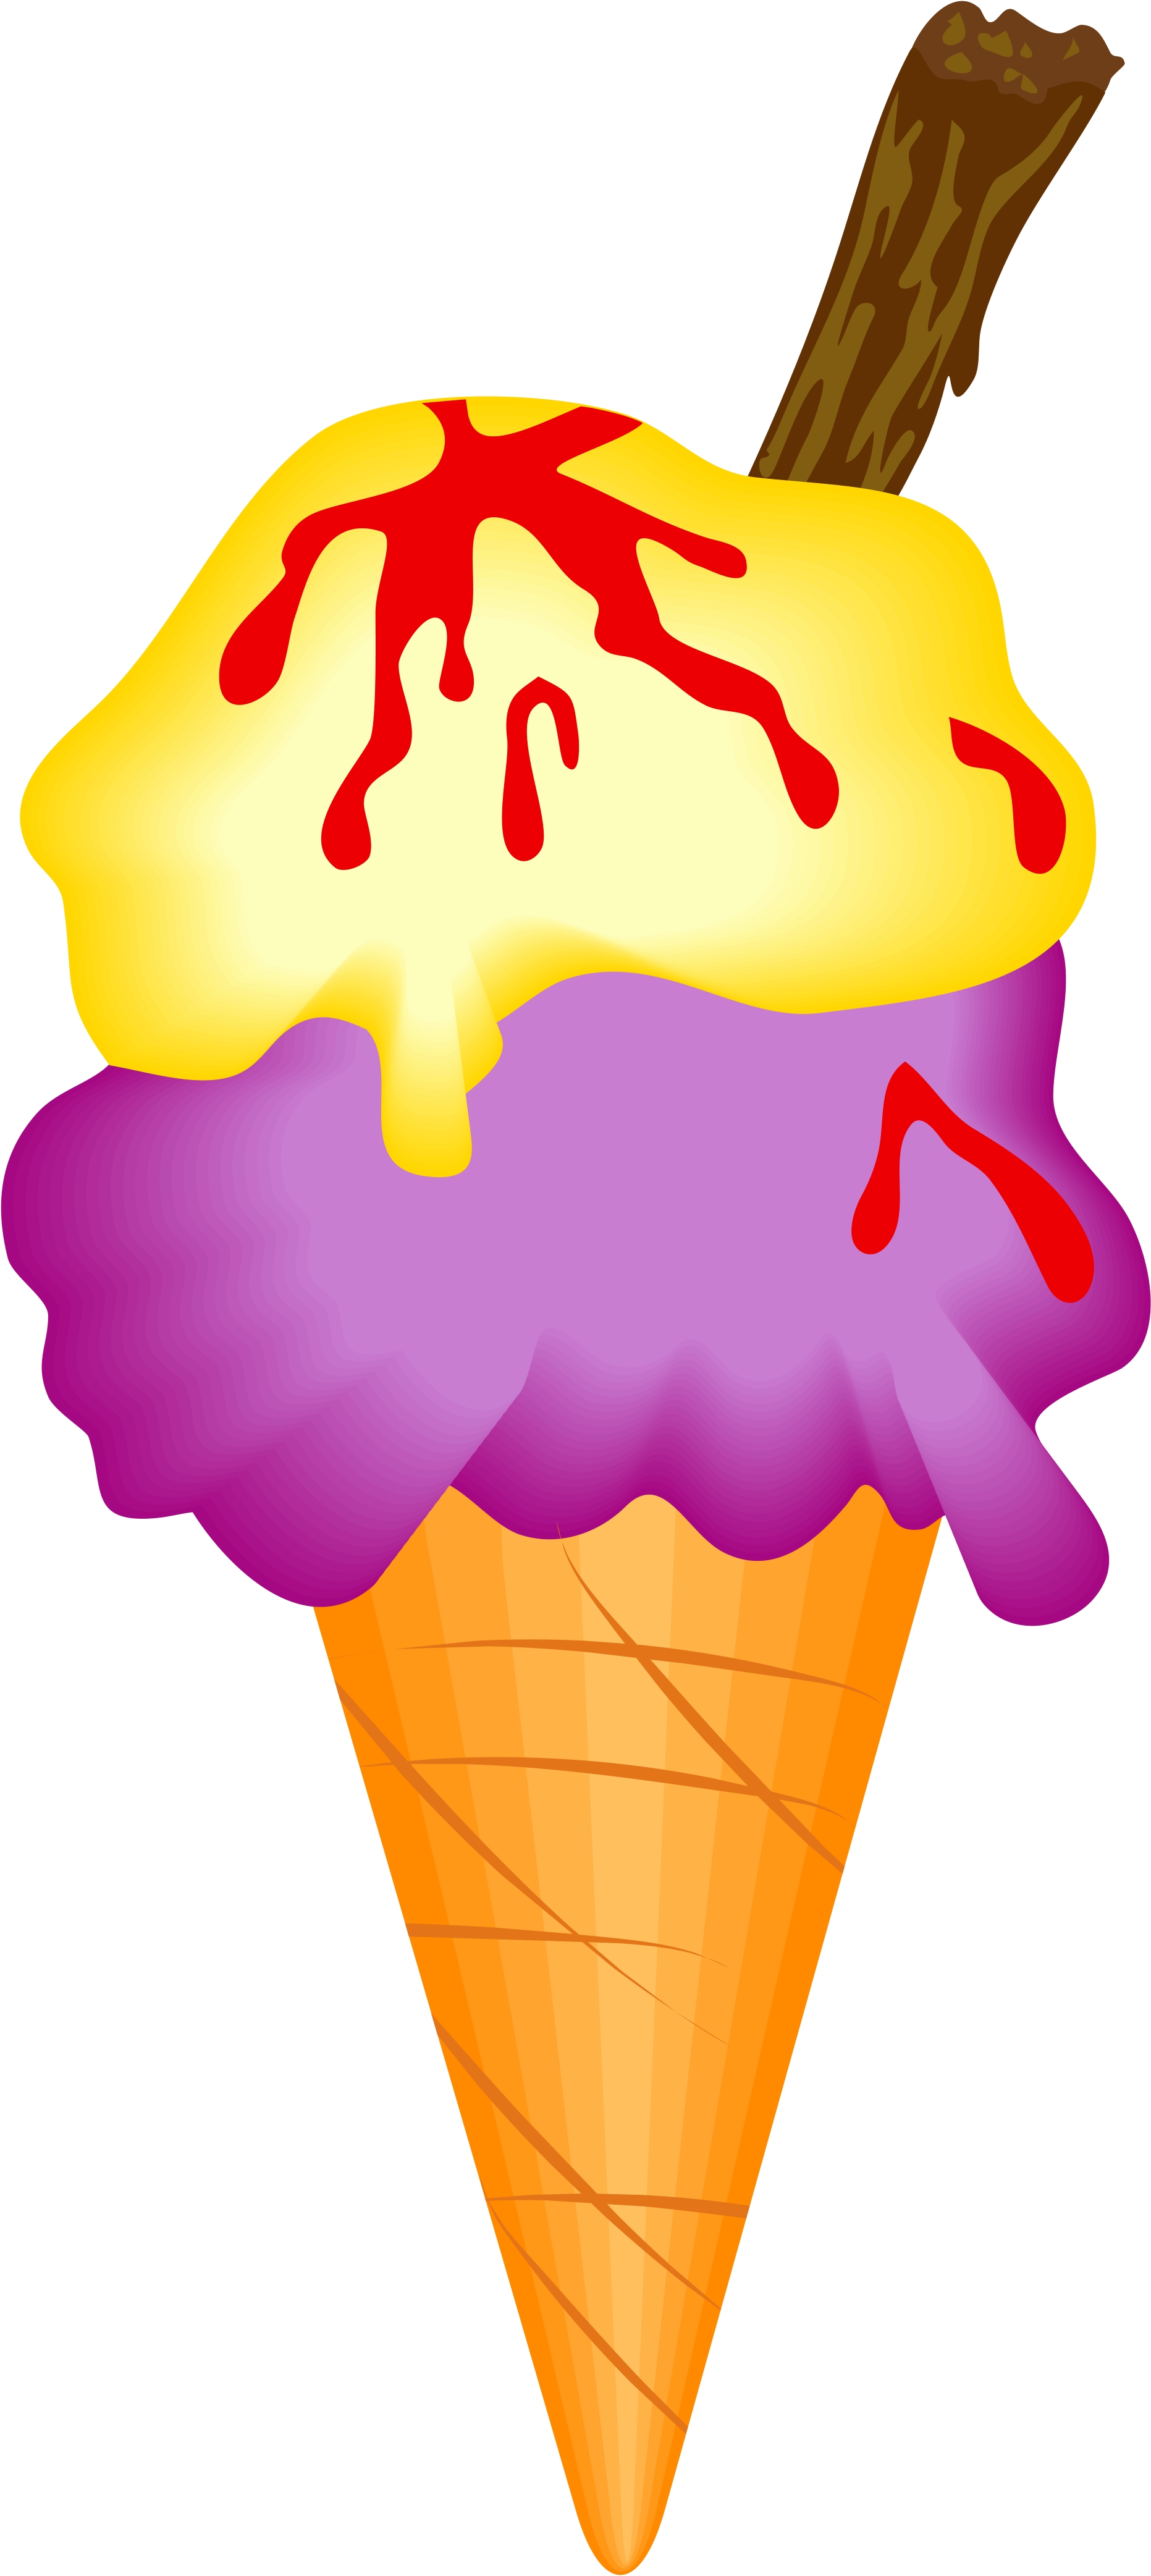 Ice Cream Cone Ice Images At Clker Clipart